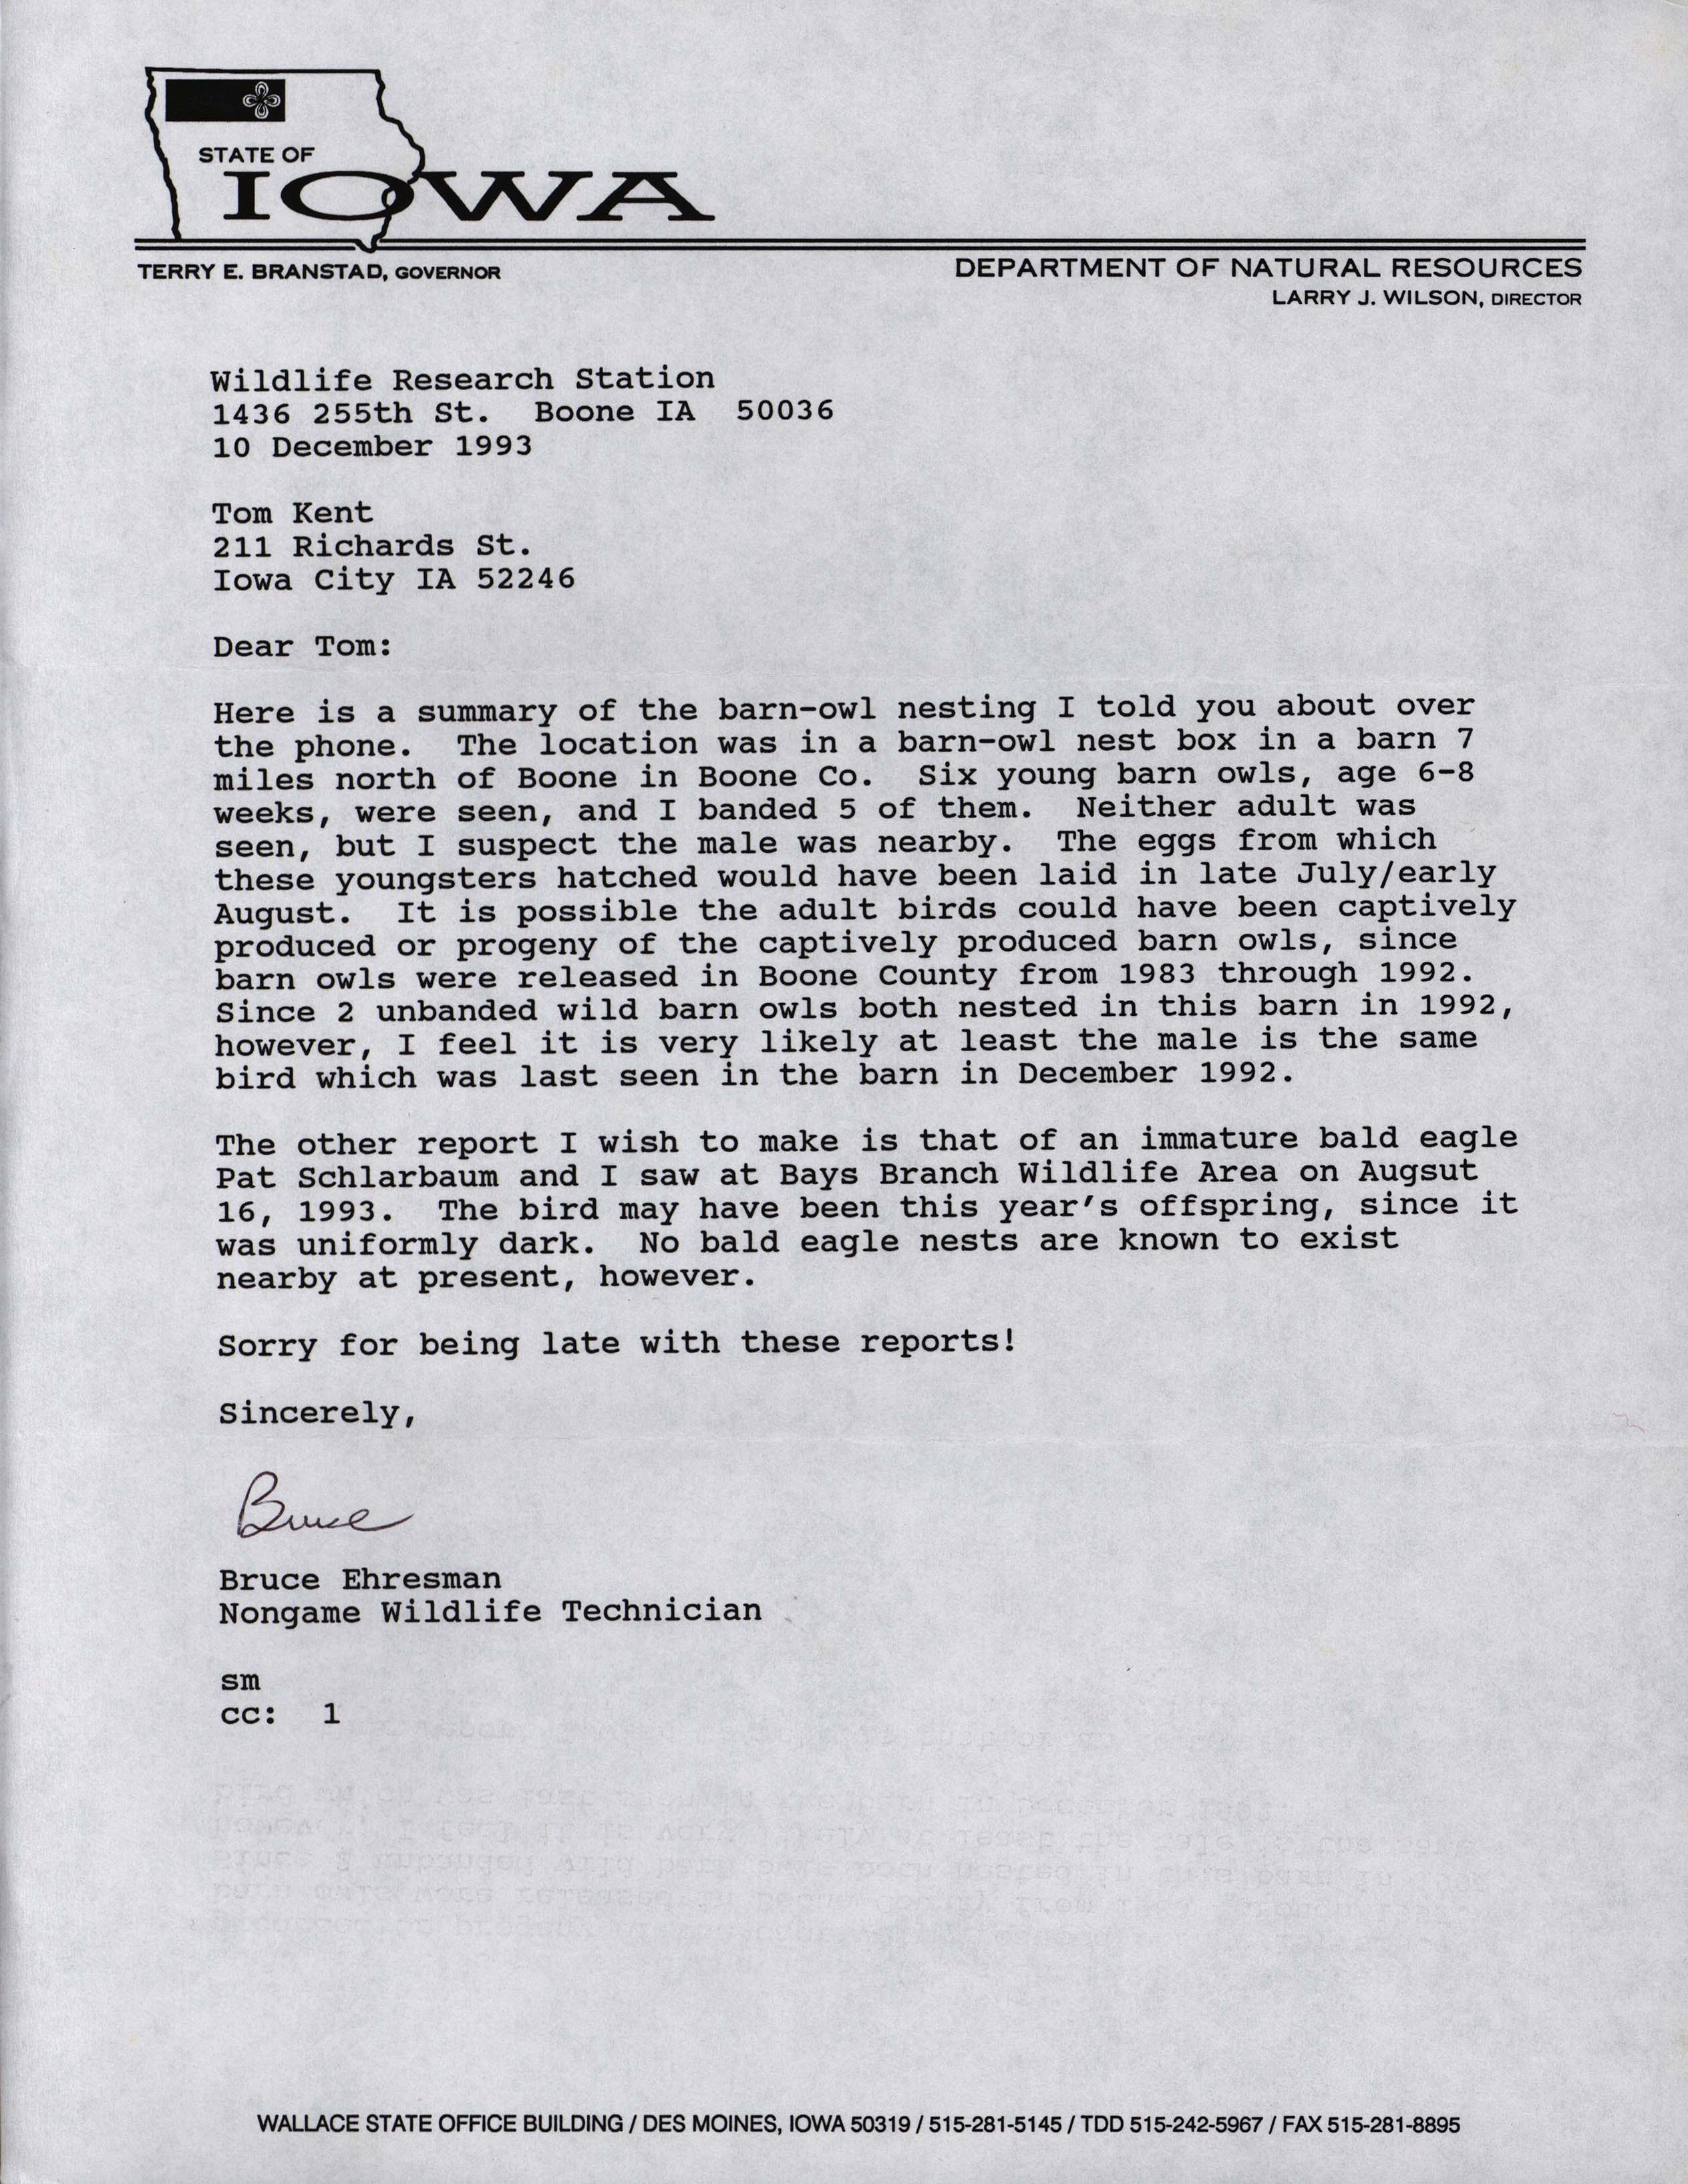 Bruce Ehresman letter to Thomas H. Kent regarding a Barn Owl nest in Boone County, December 10, 1993